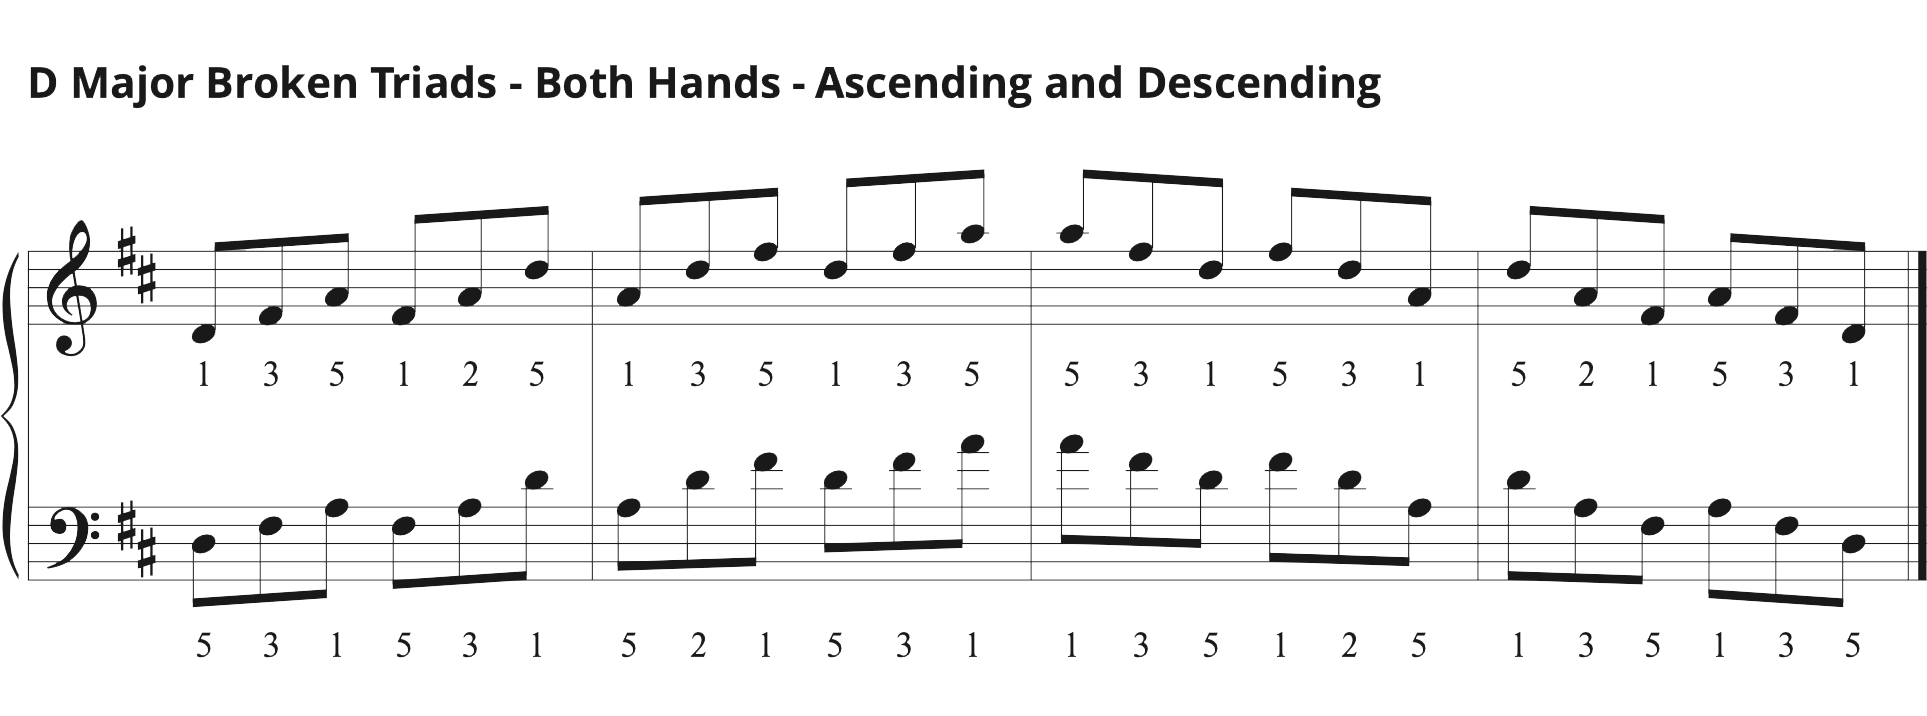 D Major Broken Triads - Both Hands - ascending and descending in triplet eighth notes with fingering on grand staff.